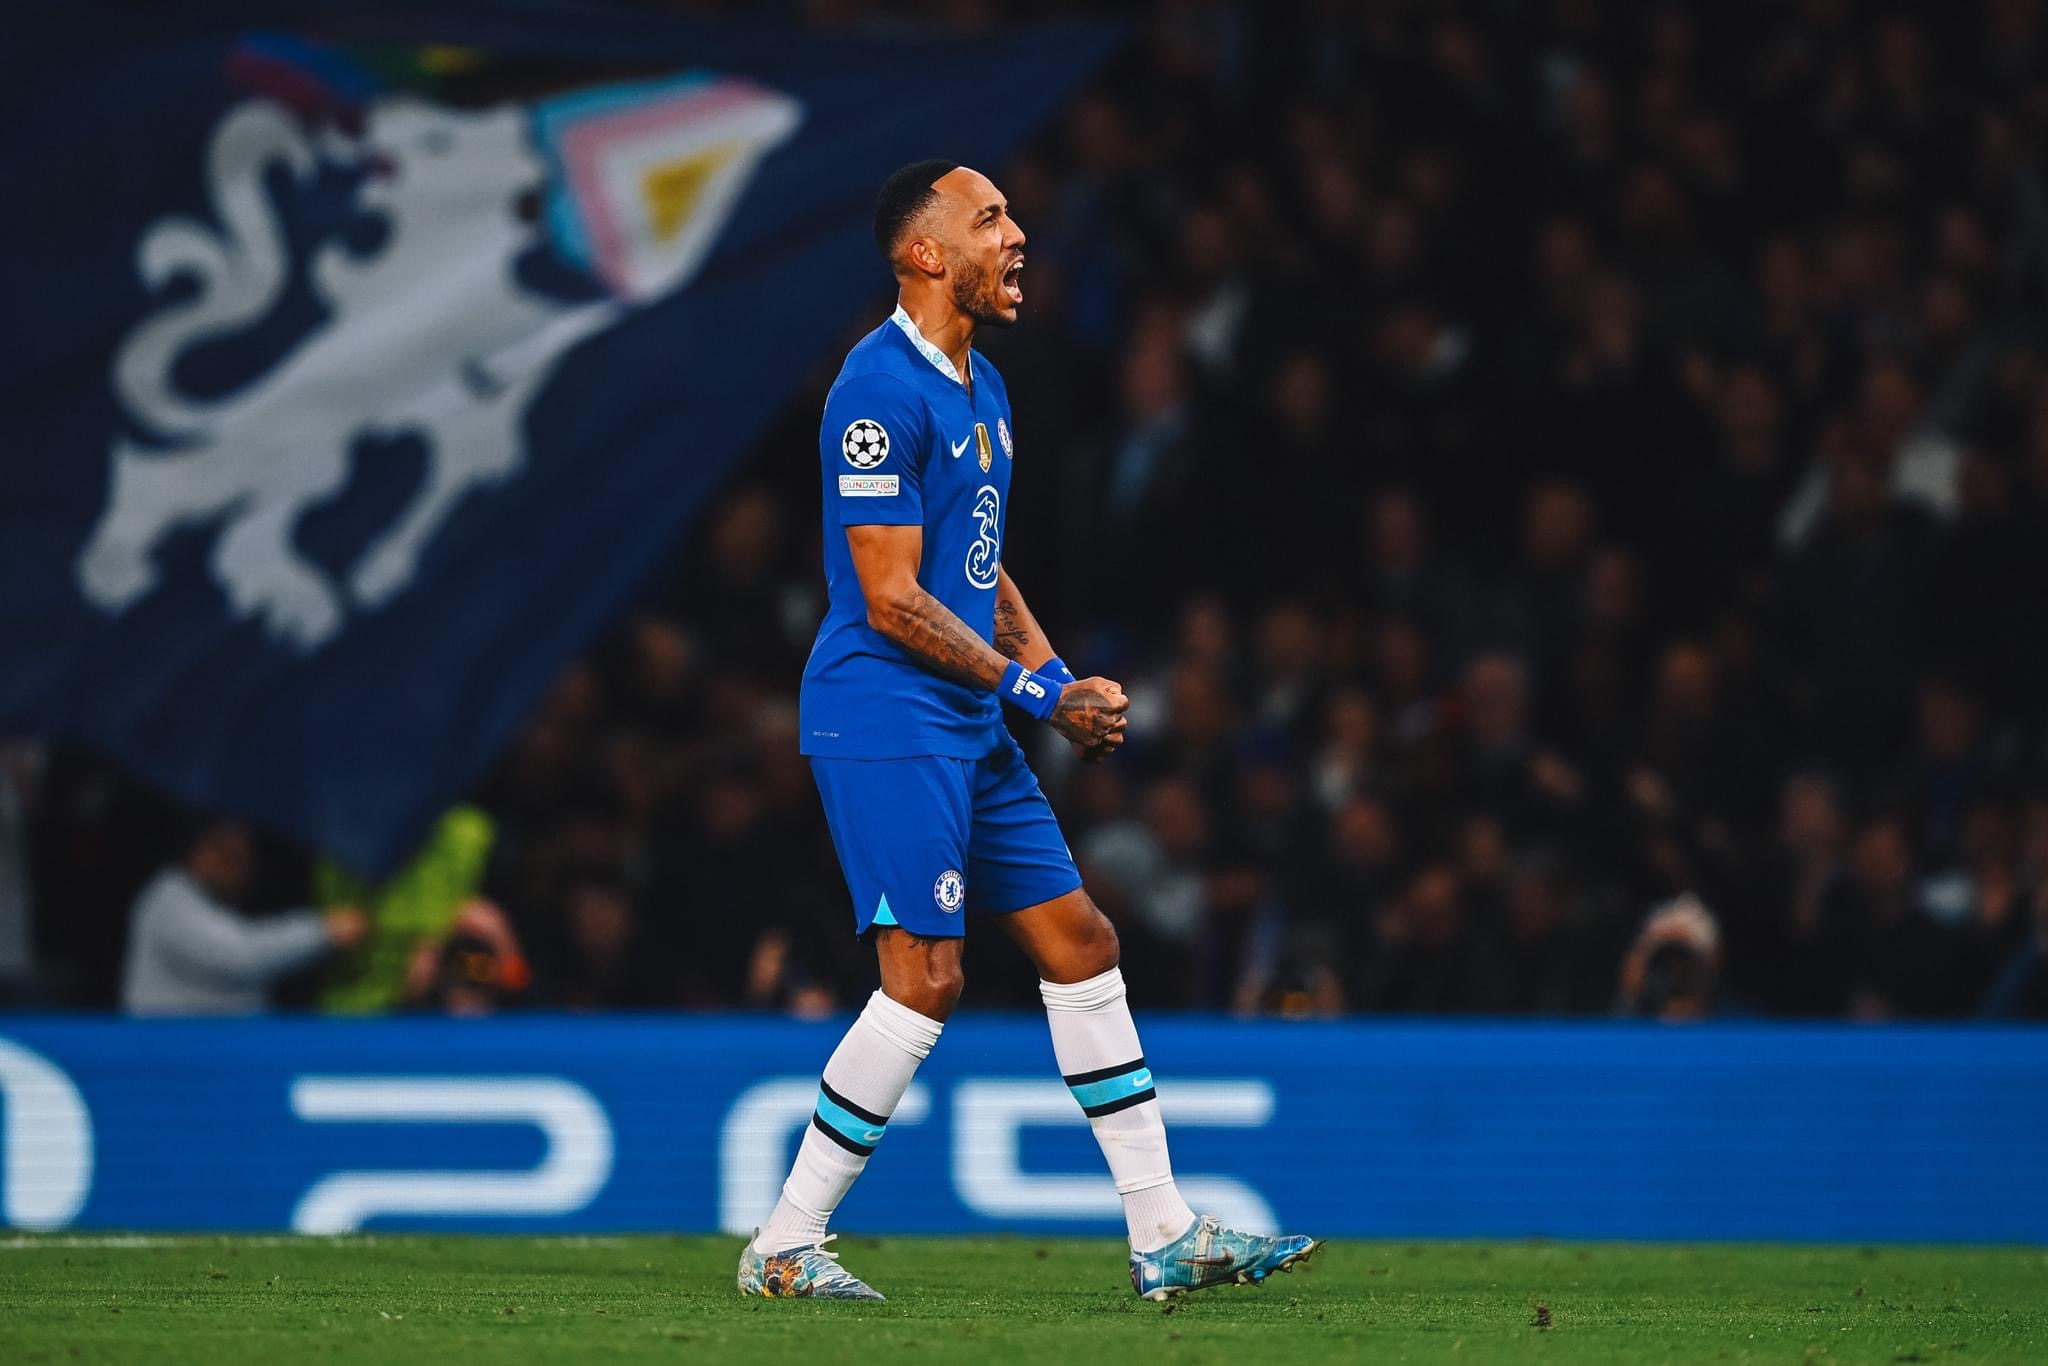 Chelsea striker Pierre-Emerick Aubameyang celebrates a goal during the Uefa Champions League match against AC Milan on 5 October 2022.